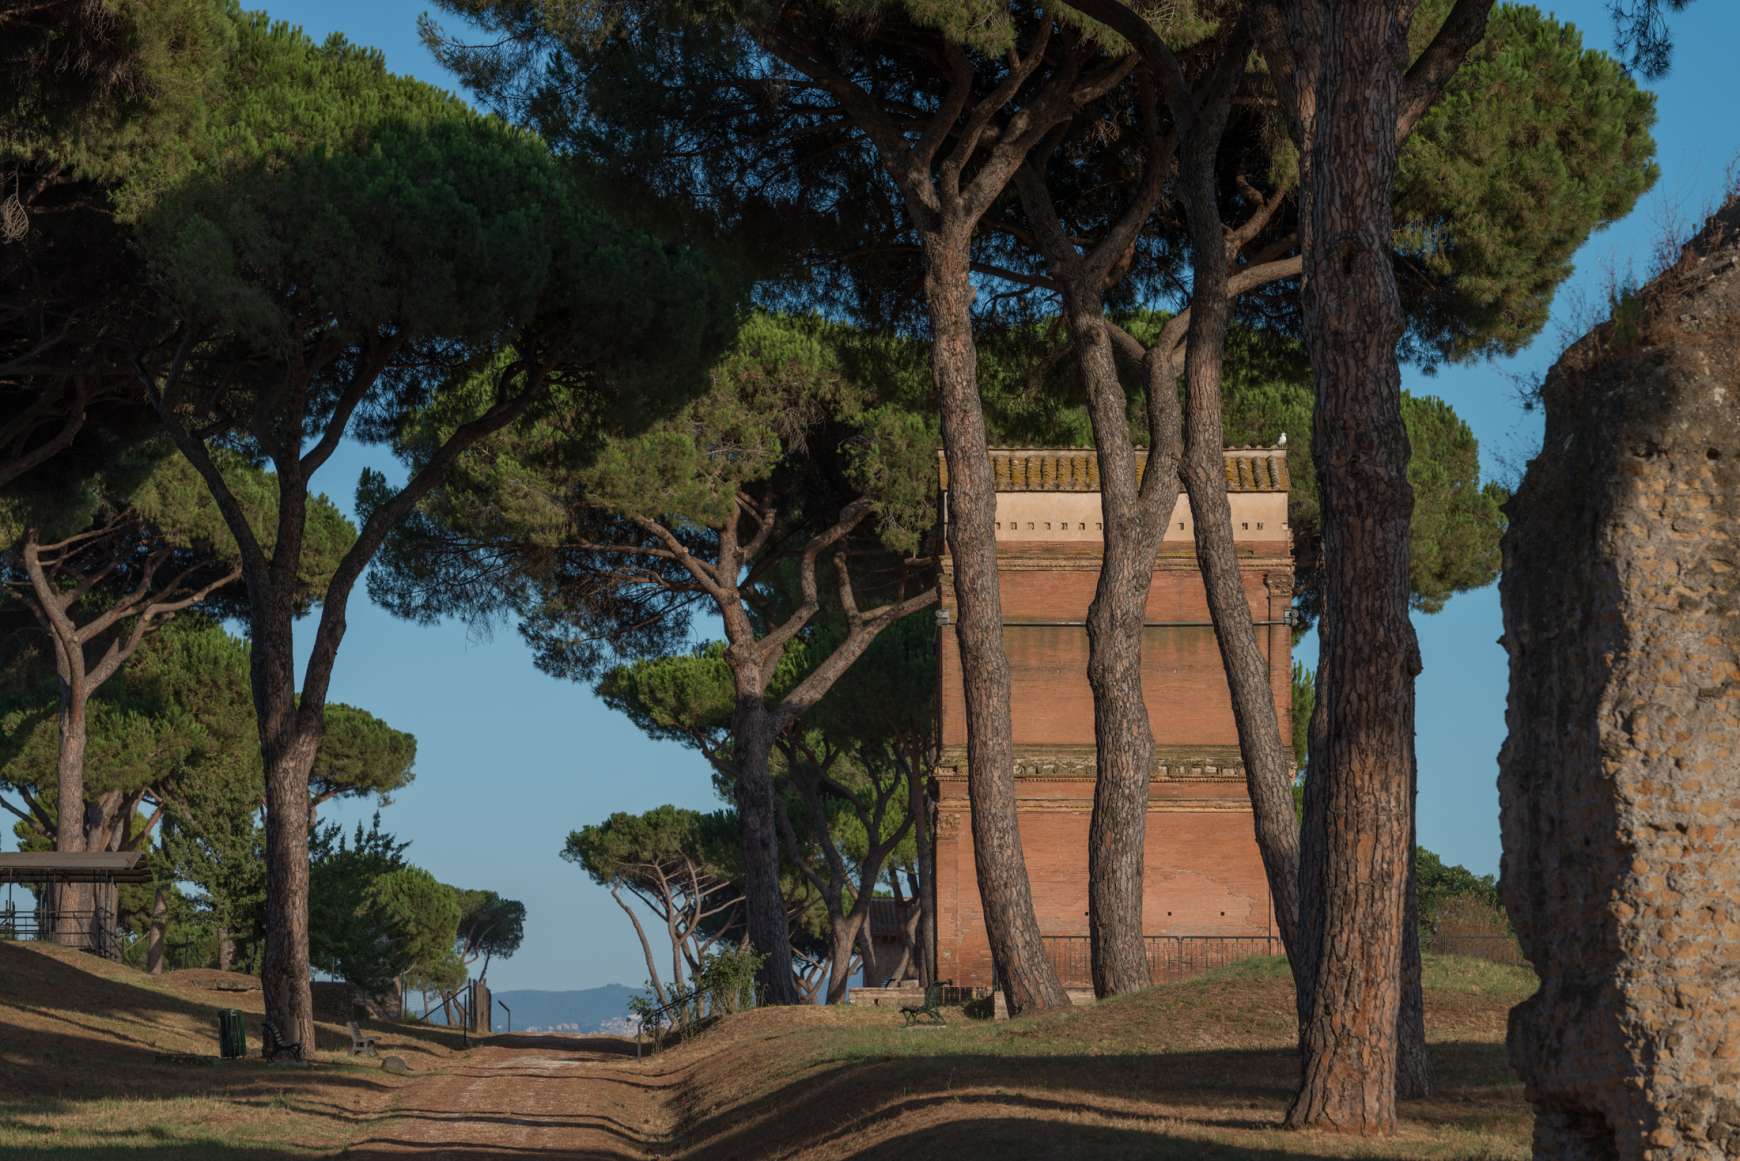 View of trees along the Appian Way in Rome